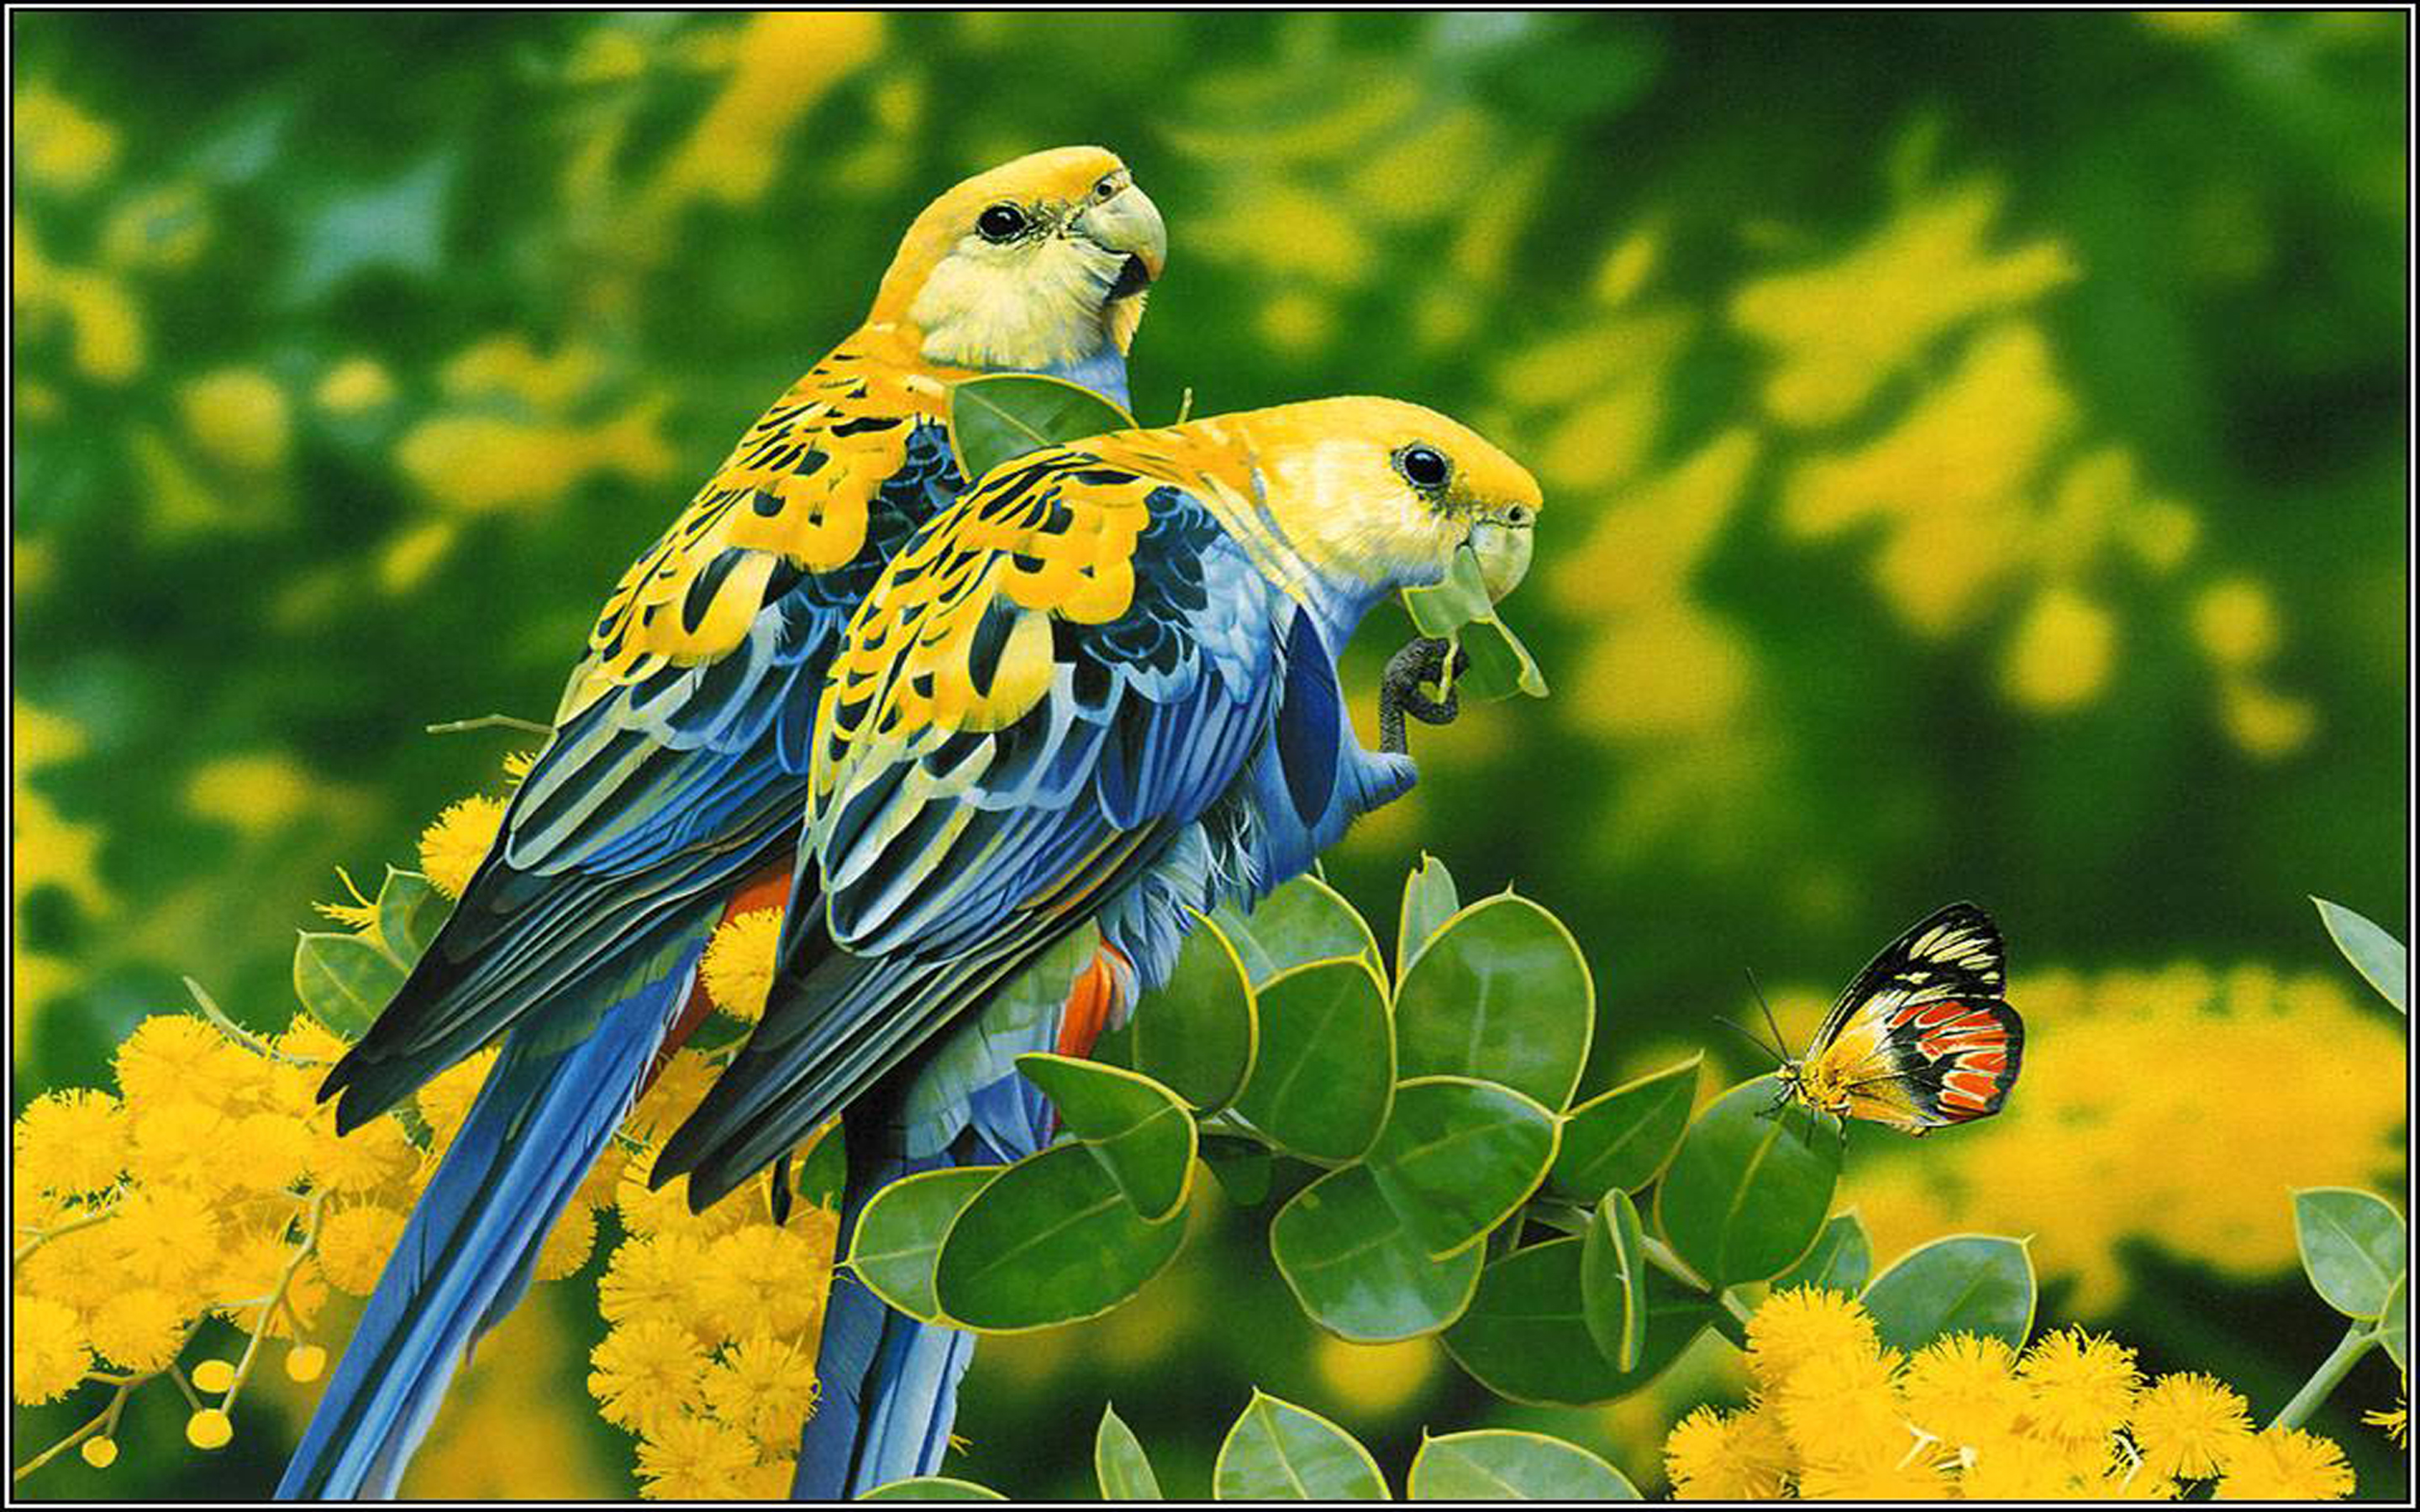 Birds Blue Yellow Parrots Butterfly Tree With Yellow Flowers And Green